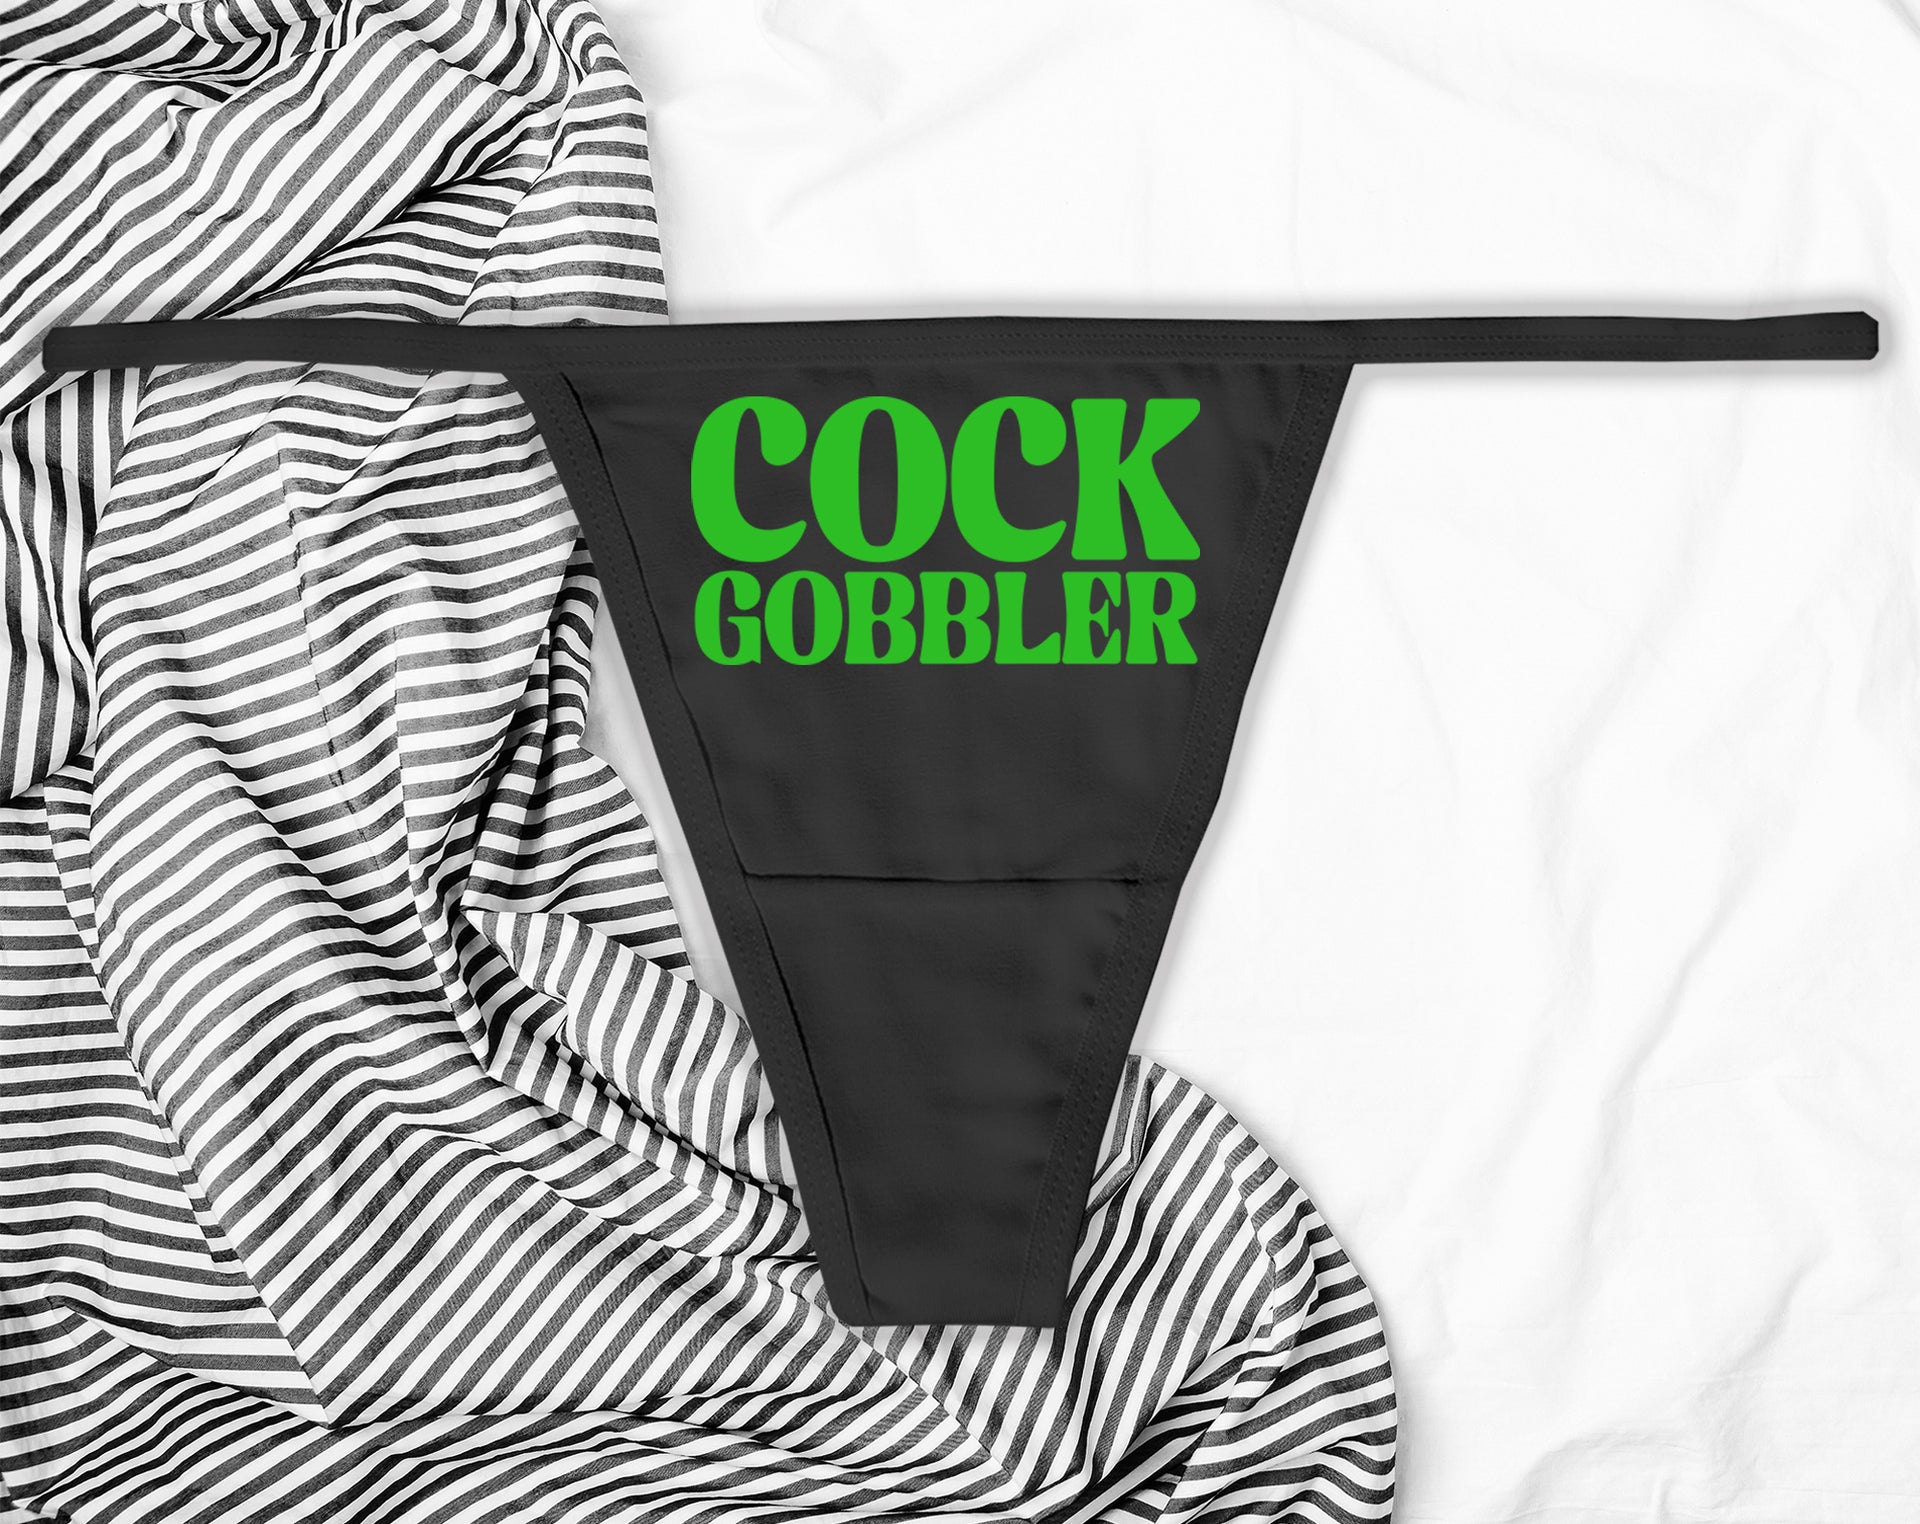 Golf Thong – Wicked Boutique